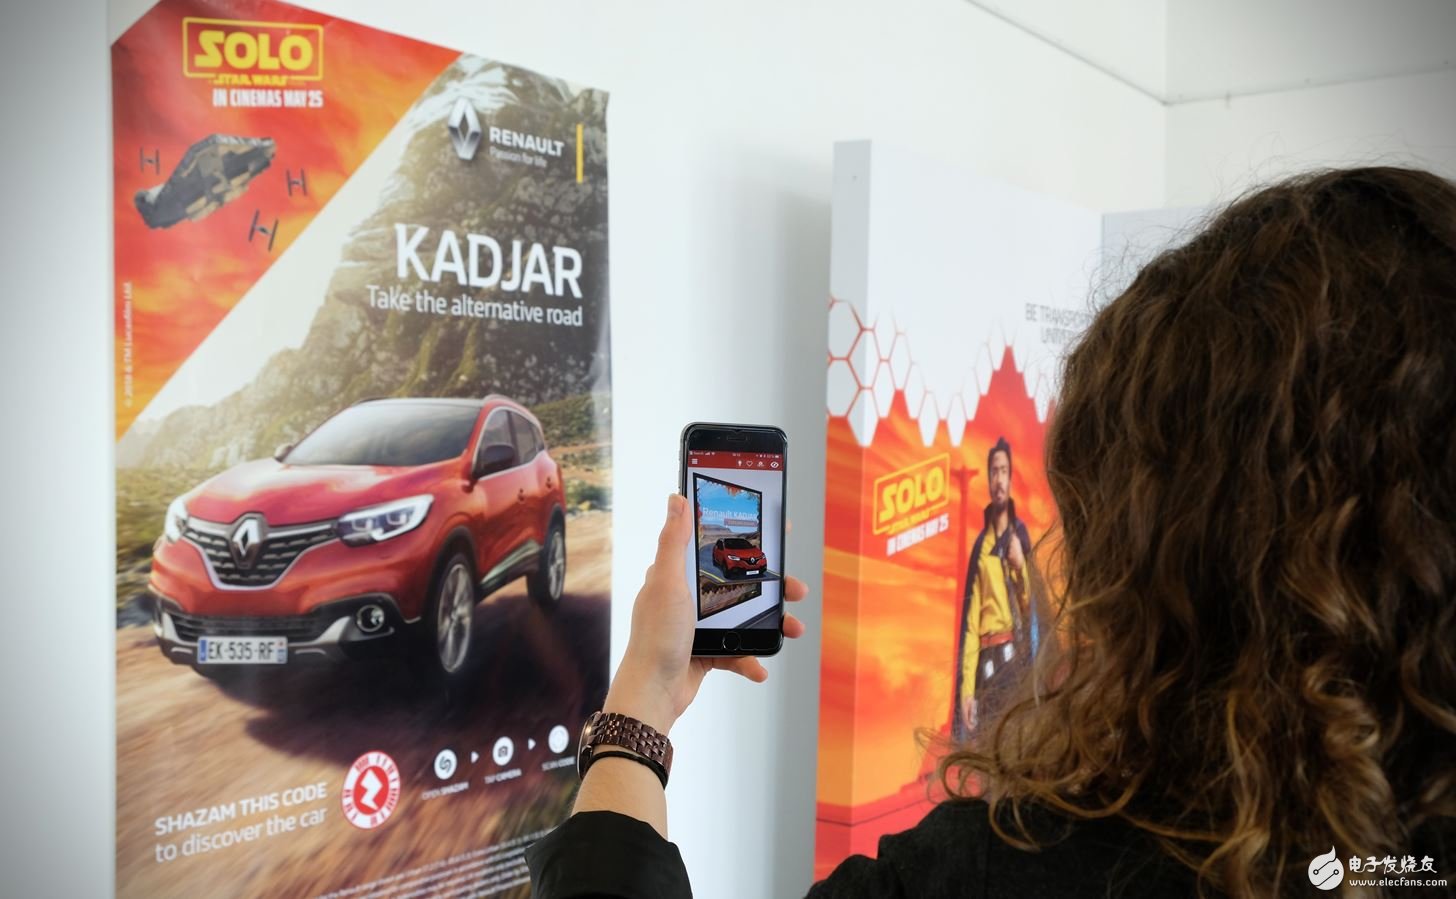 Renault uses Solo: Star Wars to deploy AR experience on Shazam